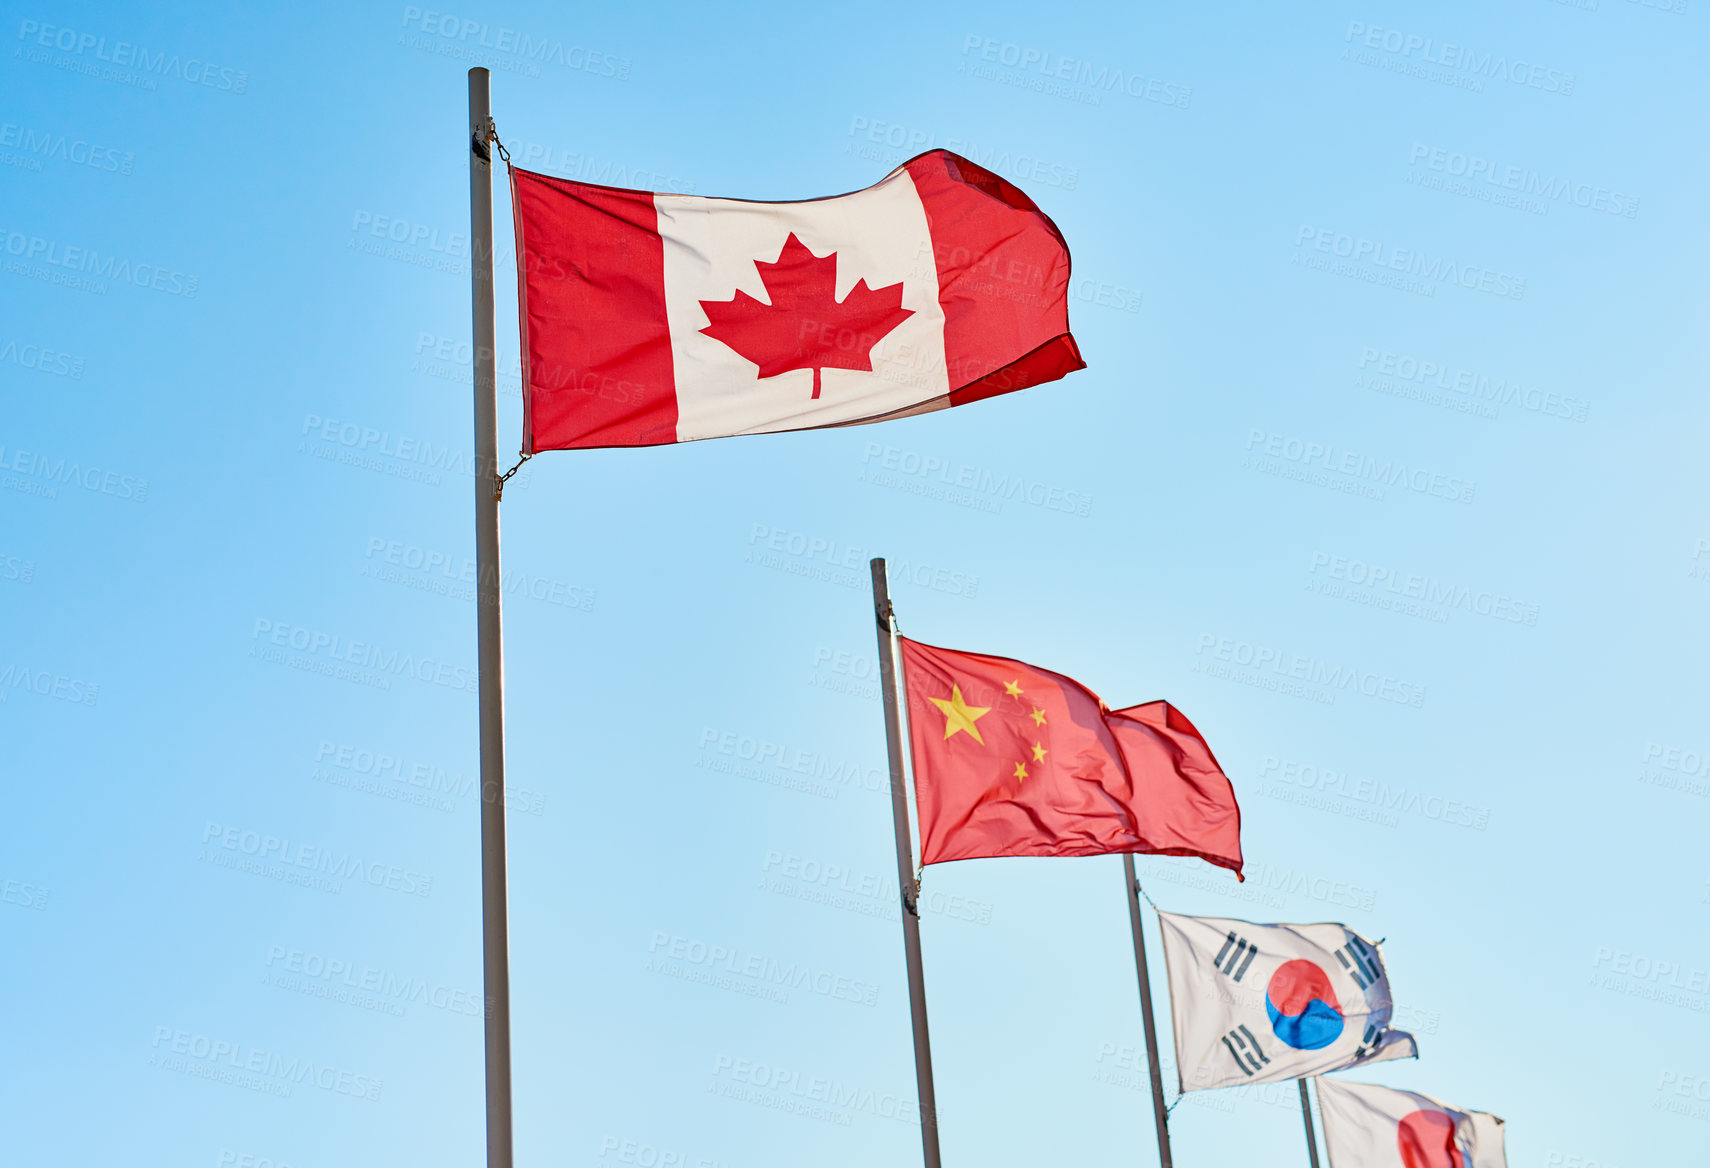 Buy stock photo Shot of a variety of different kinds of country's flags standing next to each other outside during the day